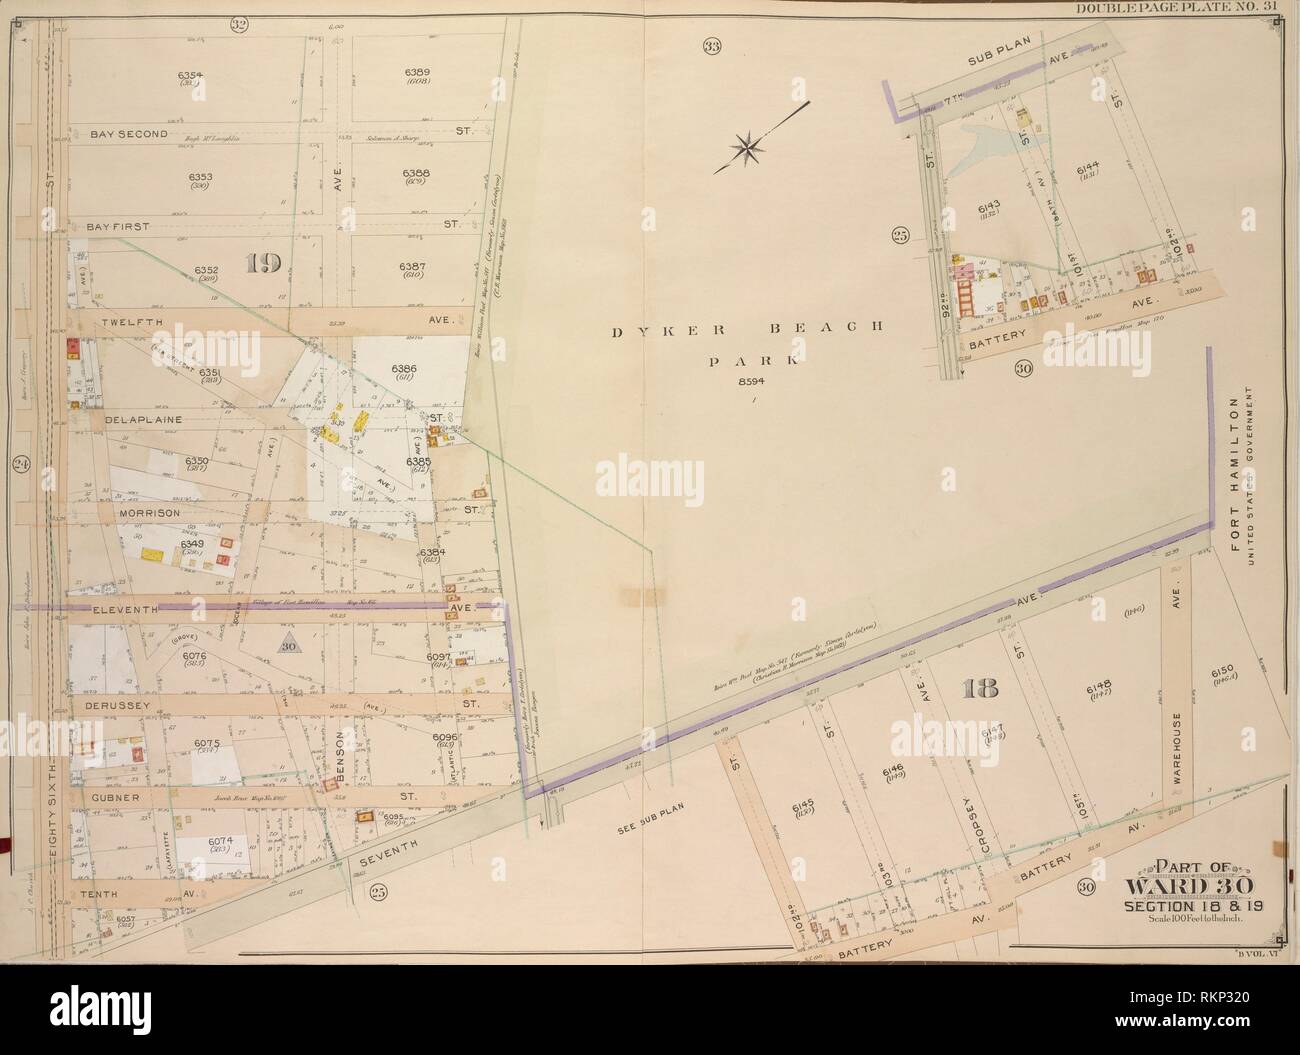 Brooklyn, Vol. 6, Double Page Plate No. 31; Part of Ward 30, Sections 18 & 19; [Map bounded by Bay Second St., Warehouse Ave., Battery Ave.; Stock Photo